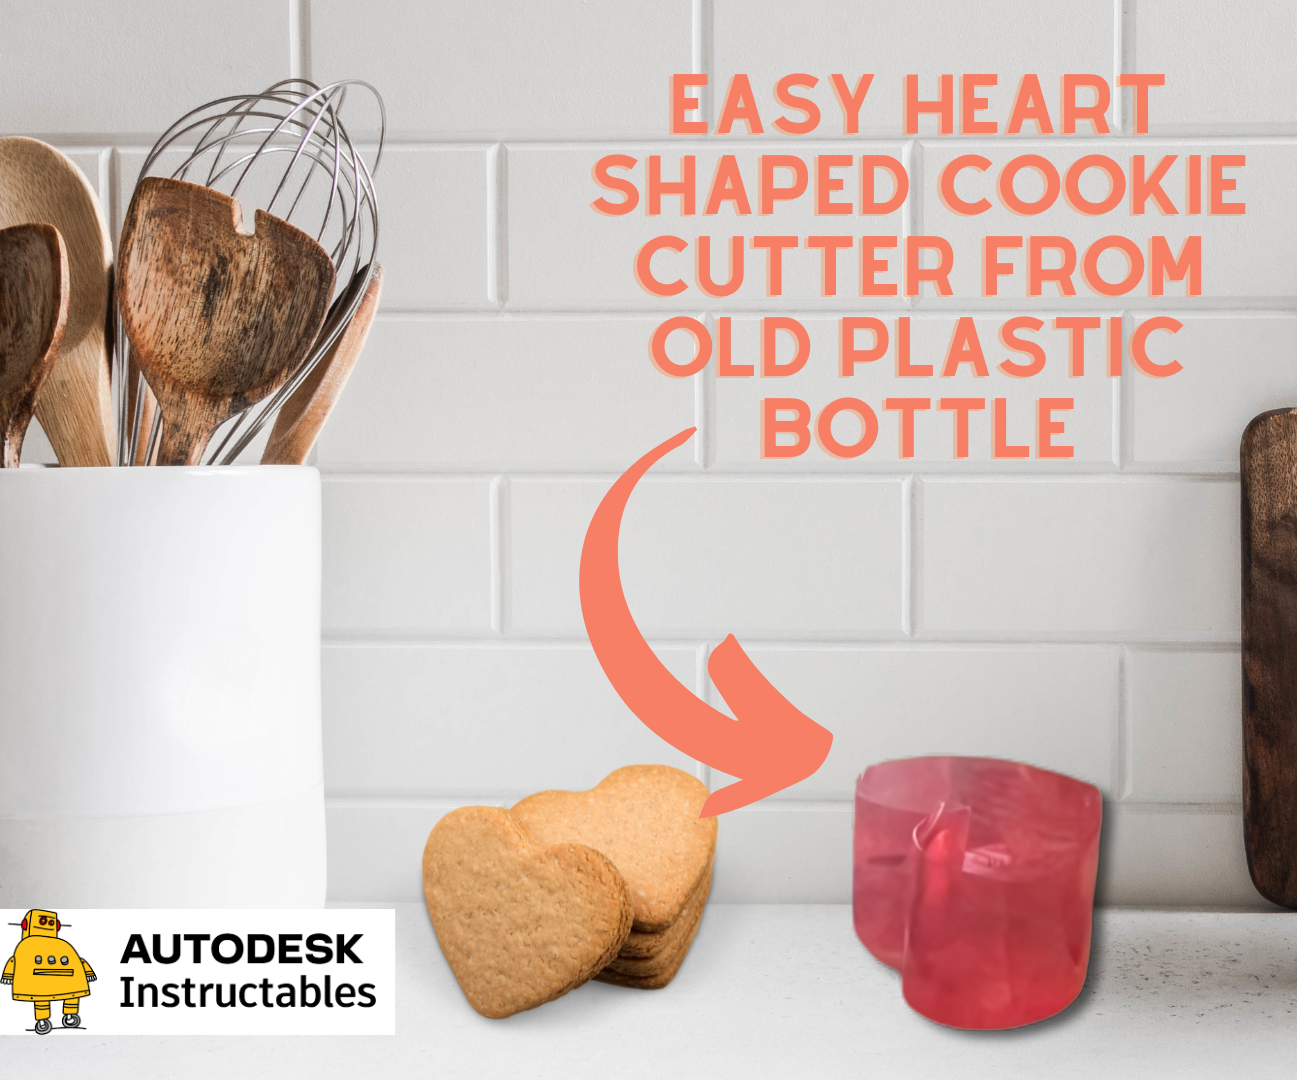 Easy Heart Shaped Cookie Cutter From Old Plastic Bottle